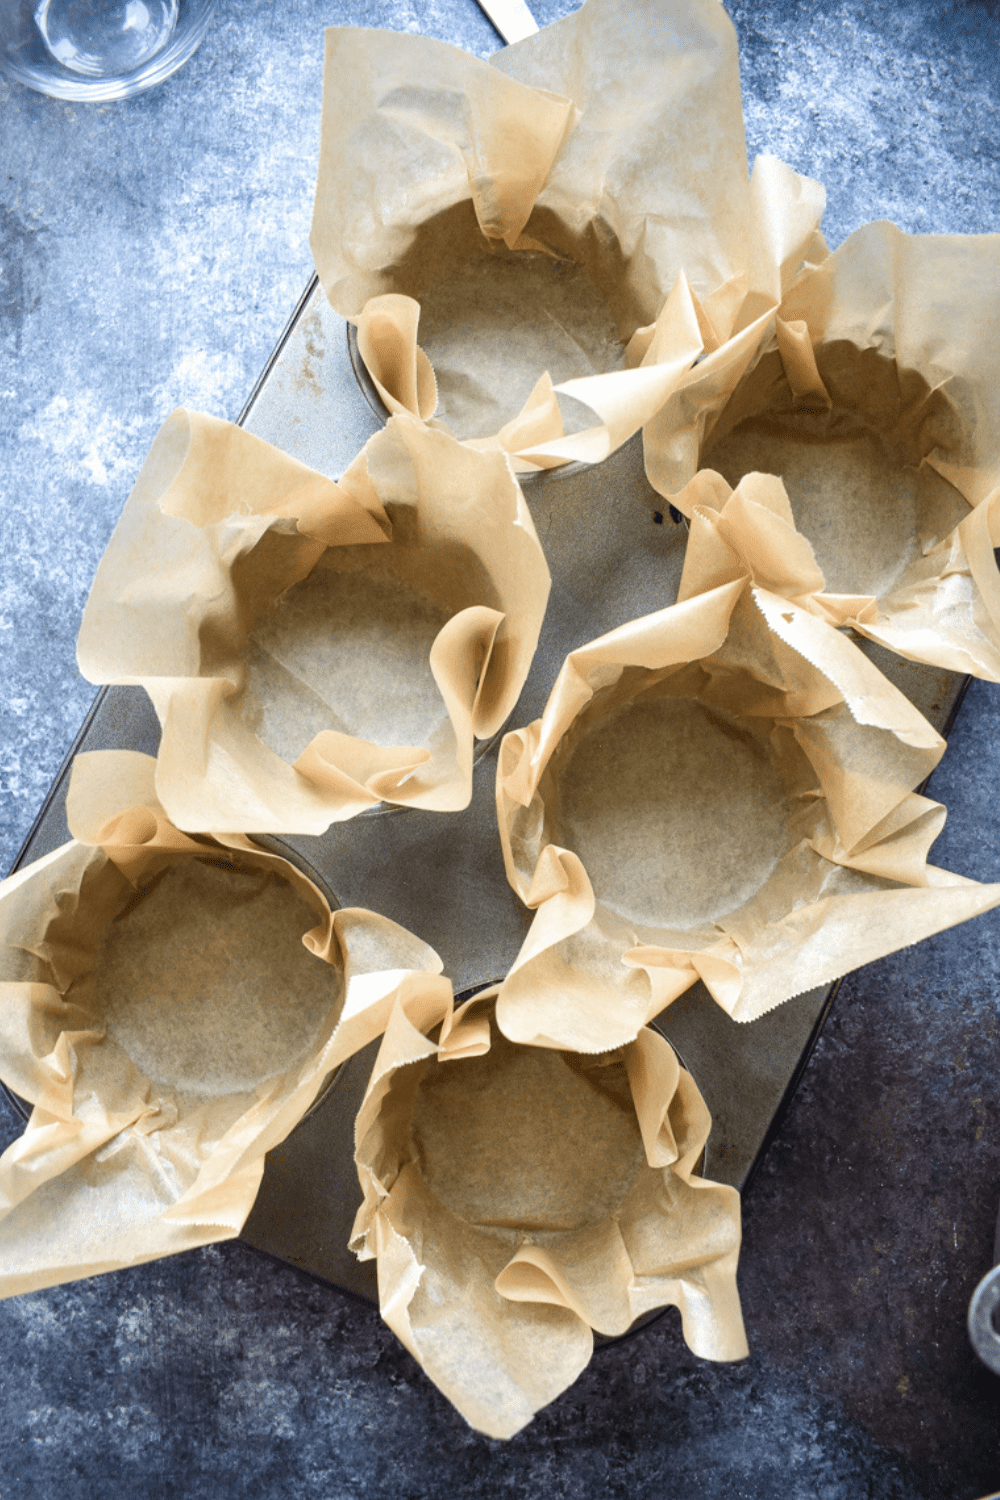 Parchment paper stuffed into jumbo muffin pan tins